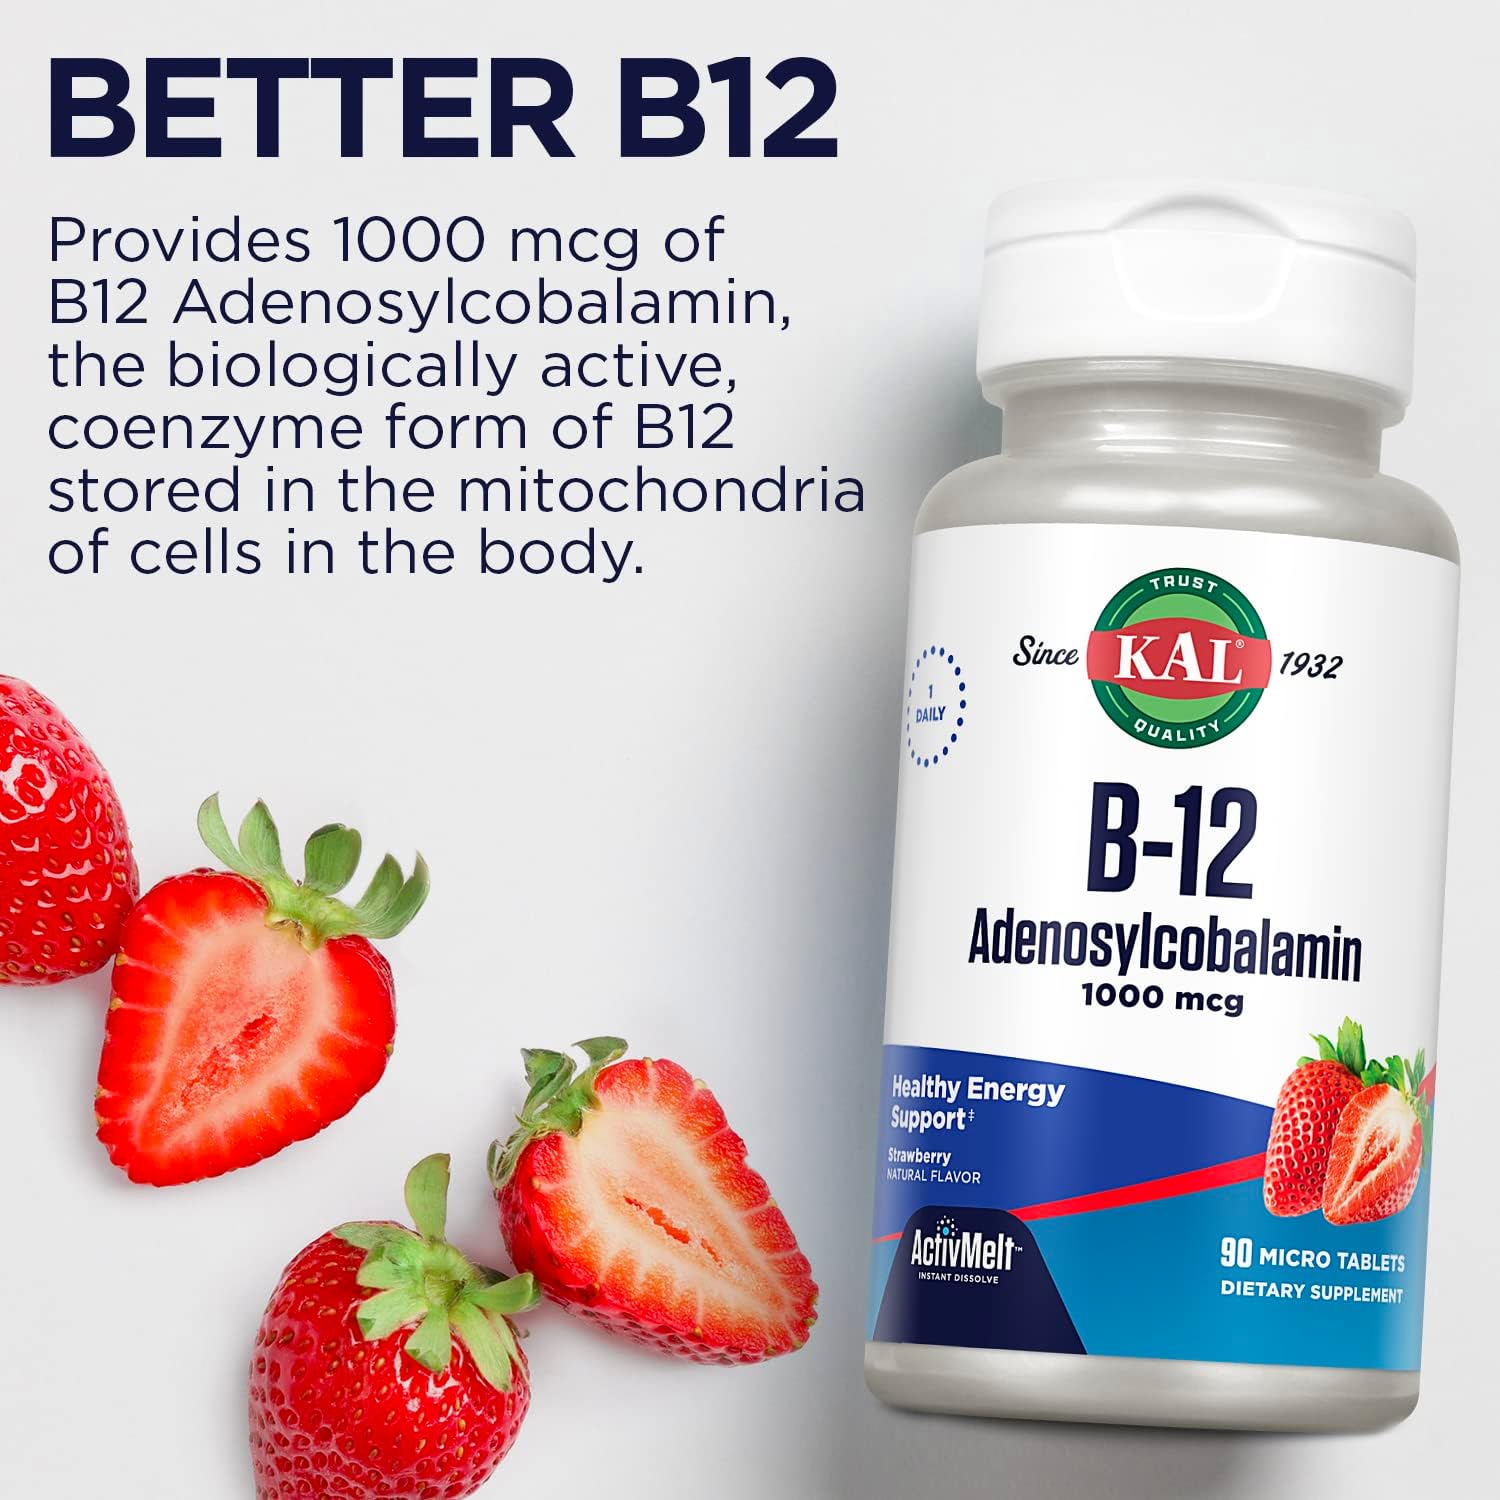 KAL Vitamin B12 1000 mcg Adenosylcobalamin ActivMelt, B12 Energy Supplements, Metabolism, Nerve and Red Blood Cell Support, High Absorption, Vegetarian, Natural Strawberry, 90 Serv, 90 Micro Tablets : Health & Household